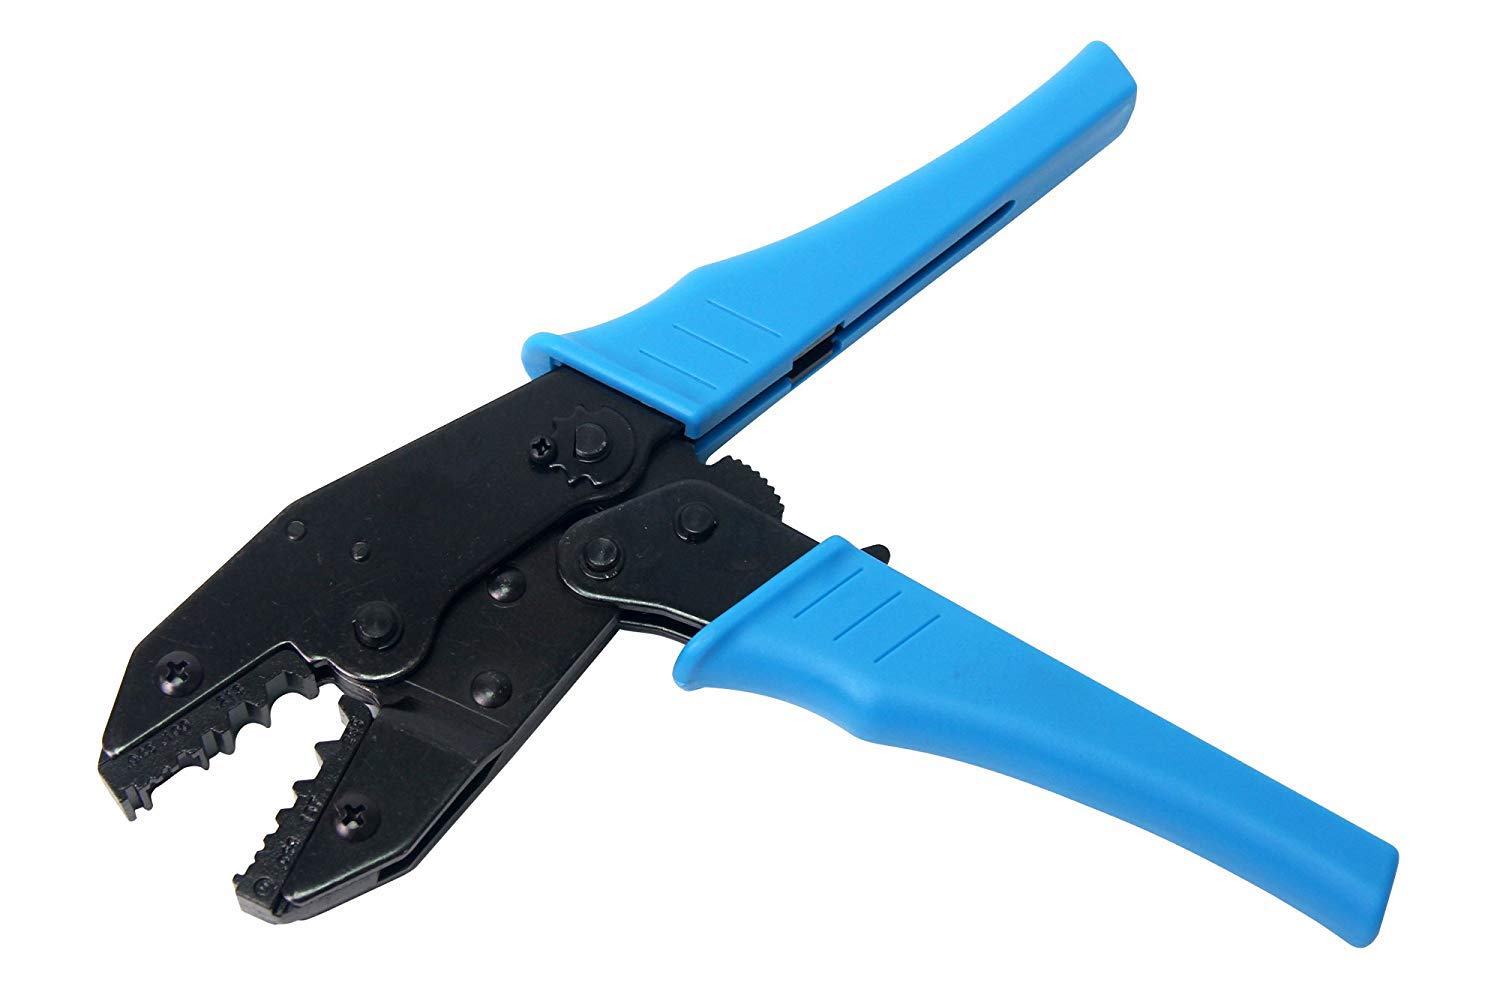 OxoxO Coax RF Connector Crimping Tool for RG-58, 59, 62, 8X, 141, 142, LMR195, 200, 240 Heavy Duty